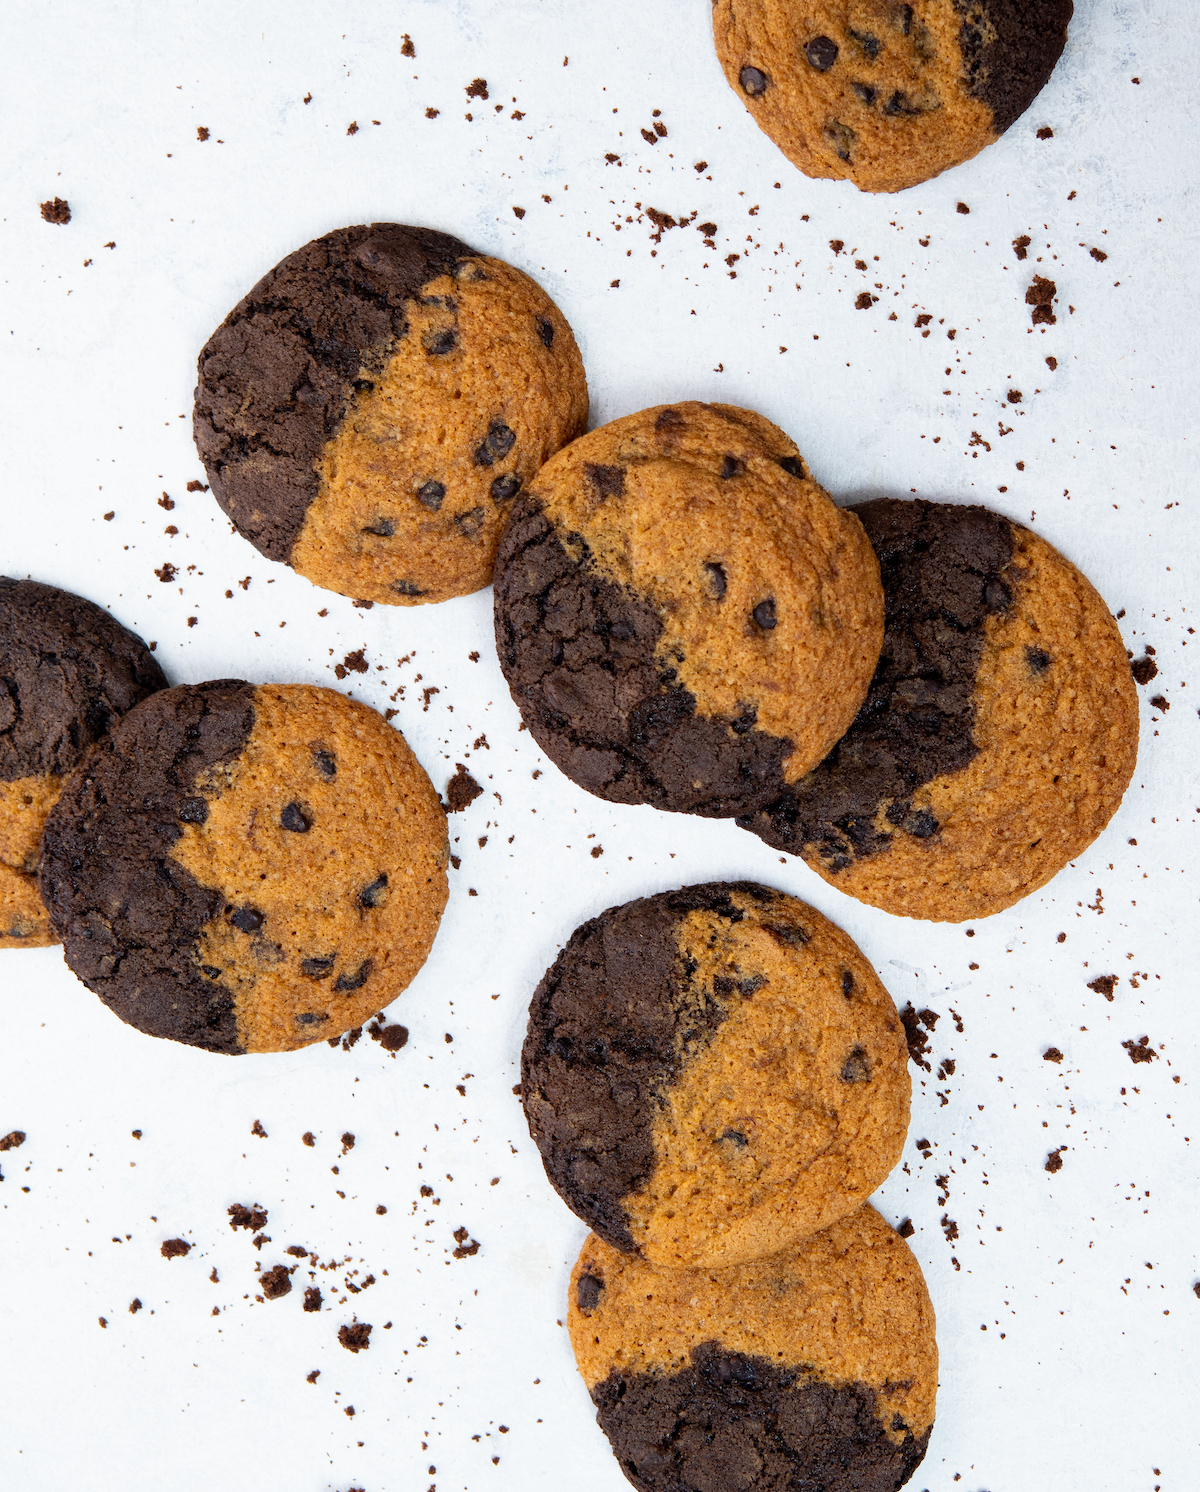 Baked chocolate chip and brownie cookies